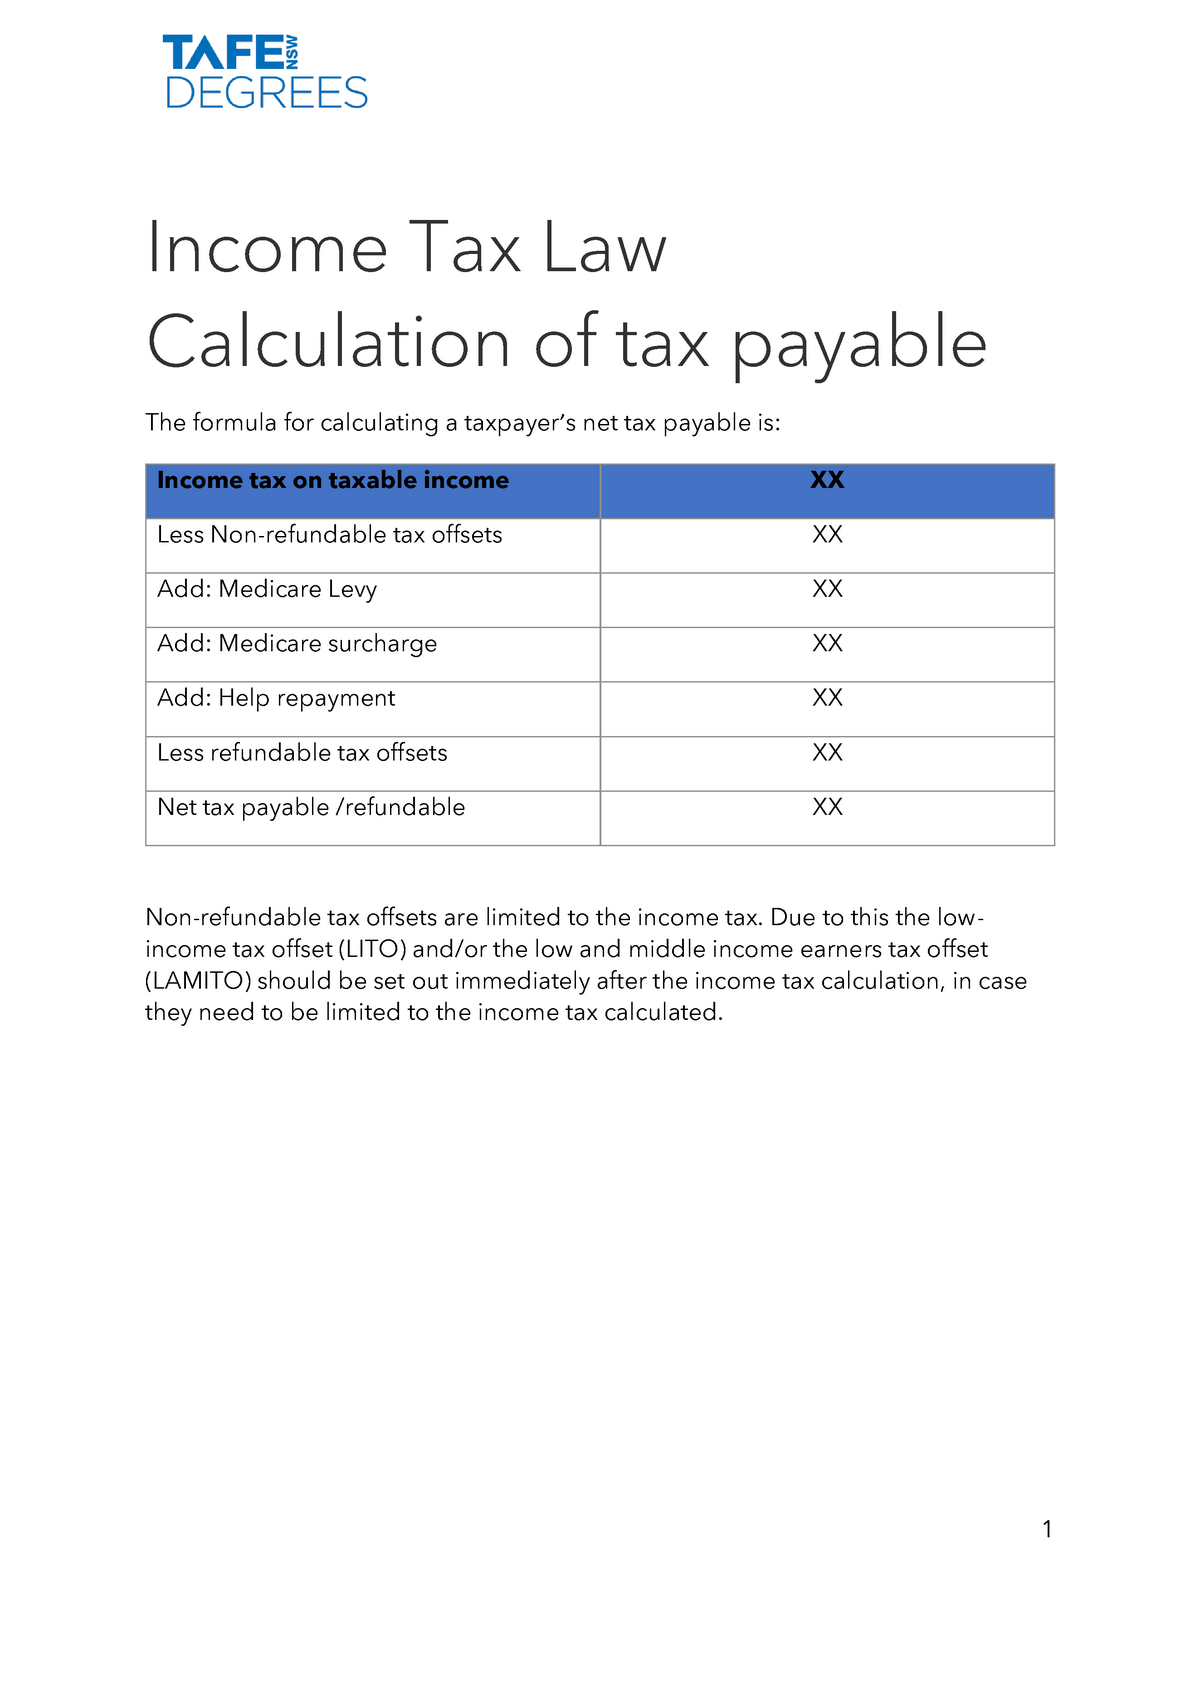 income-tax-law-calculation-of-tax-payable-income-tax-law-calculation